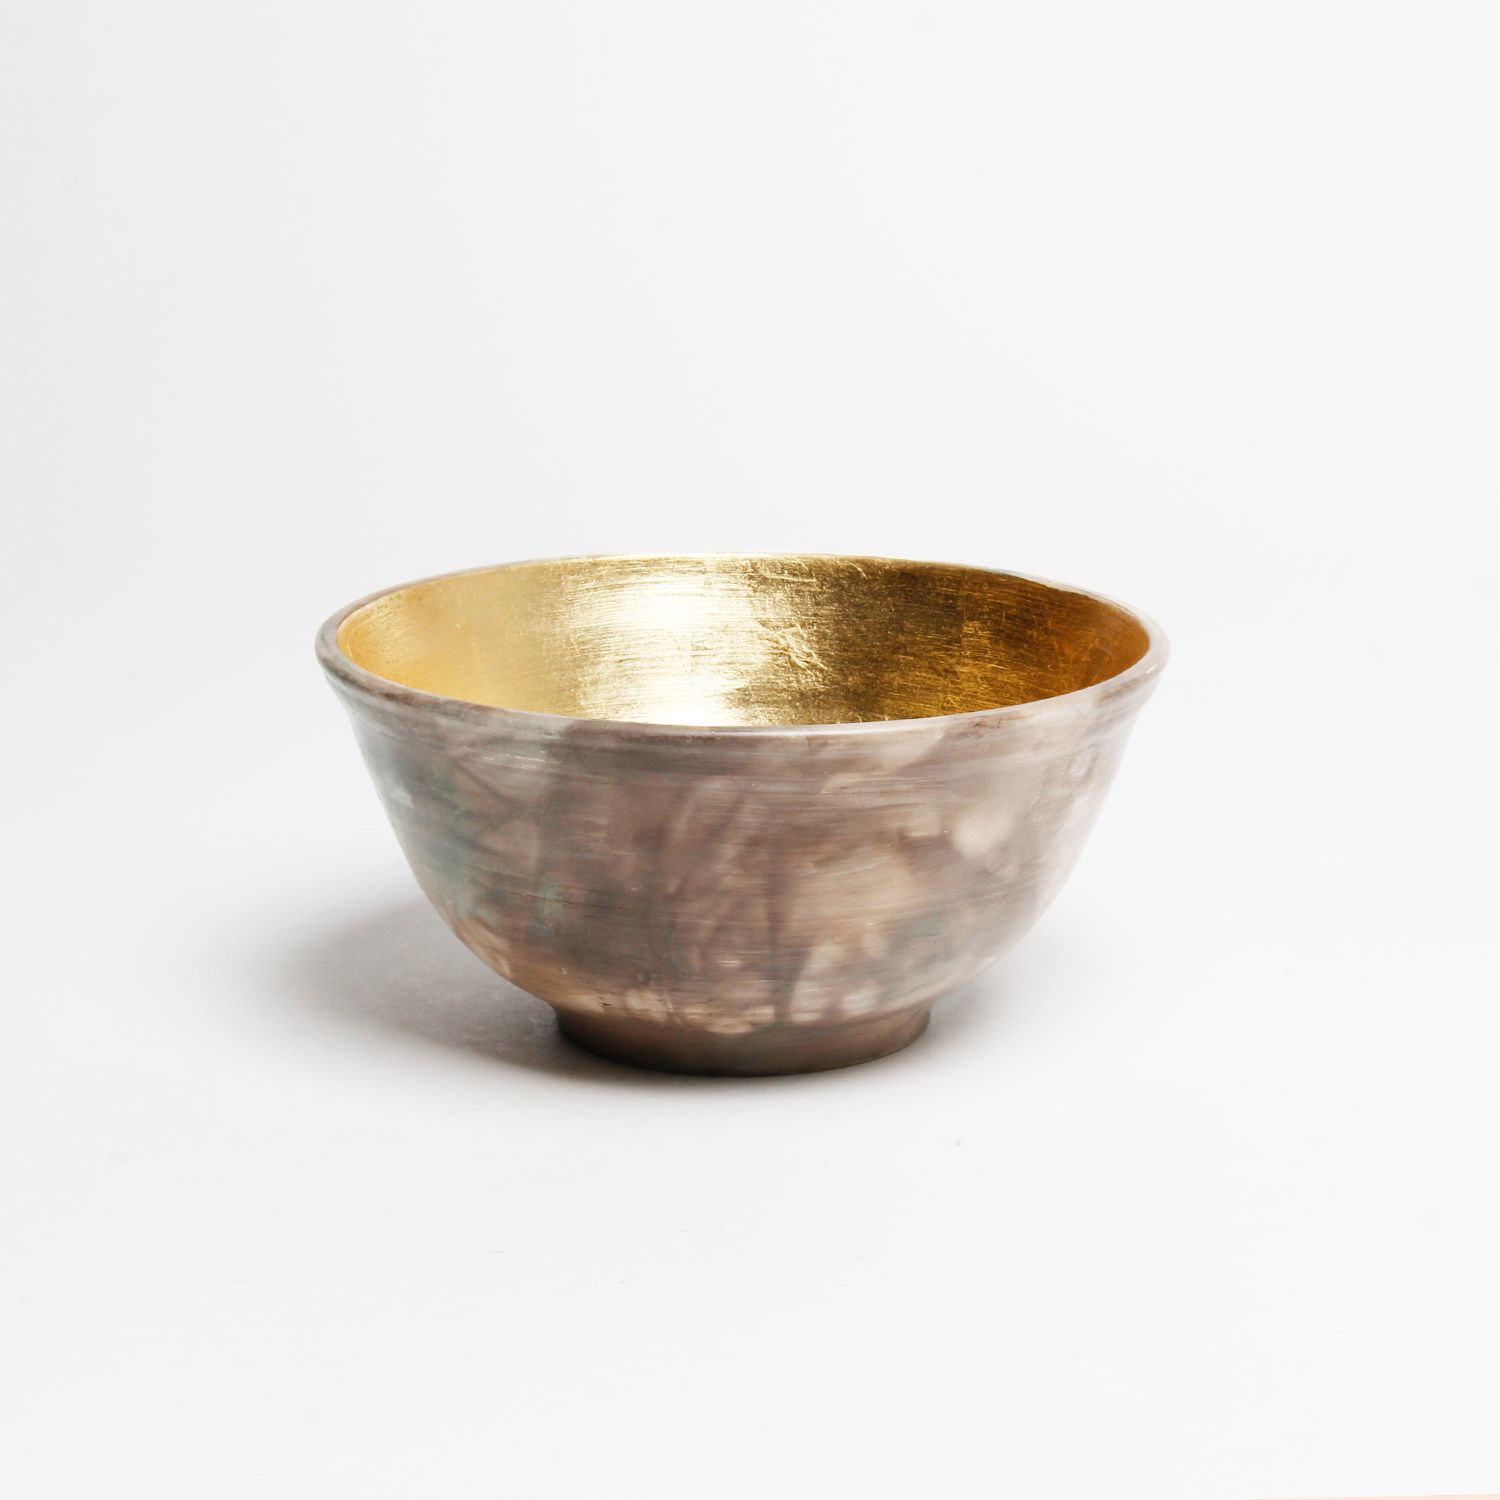 Susan Card: Smoke Fired Bowl (Each Sold Separately) Product Image 7 of 7